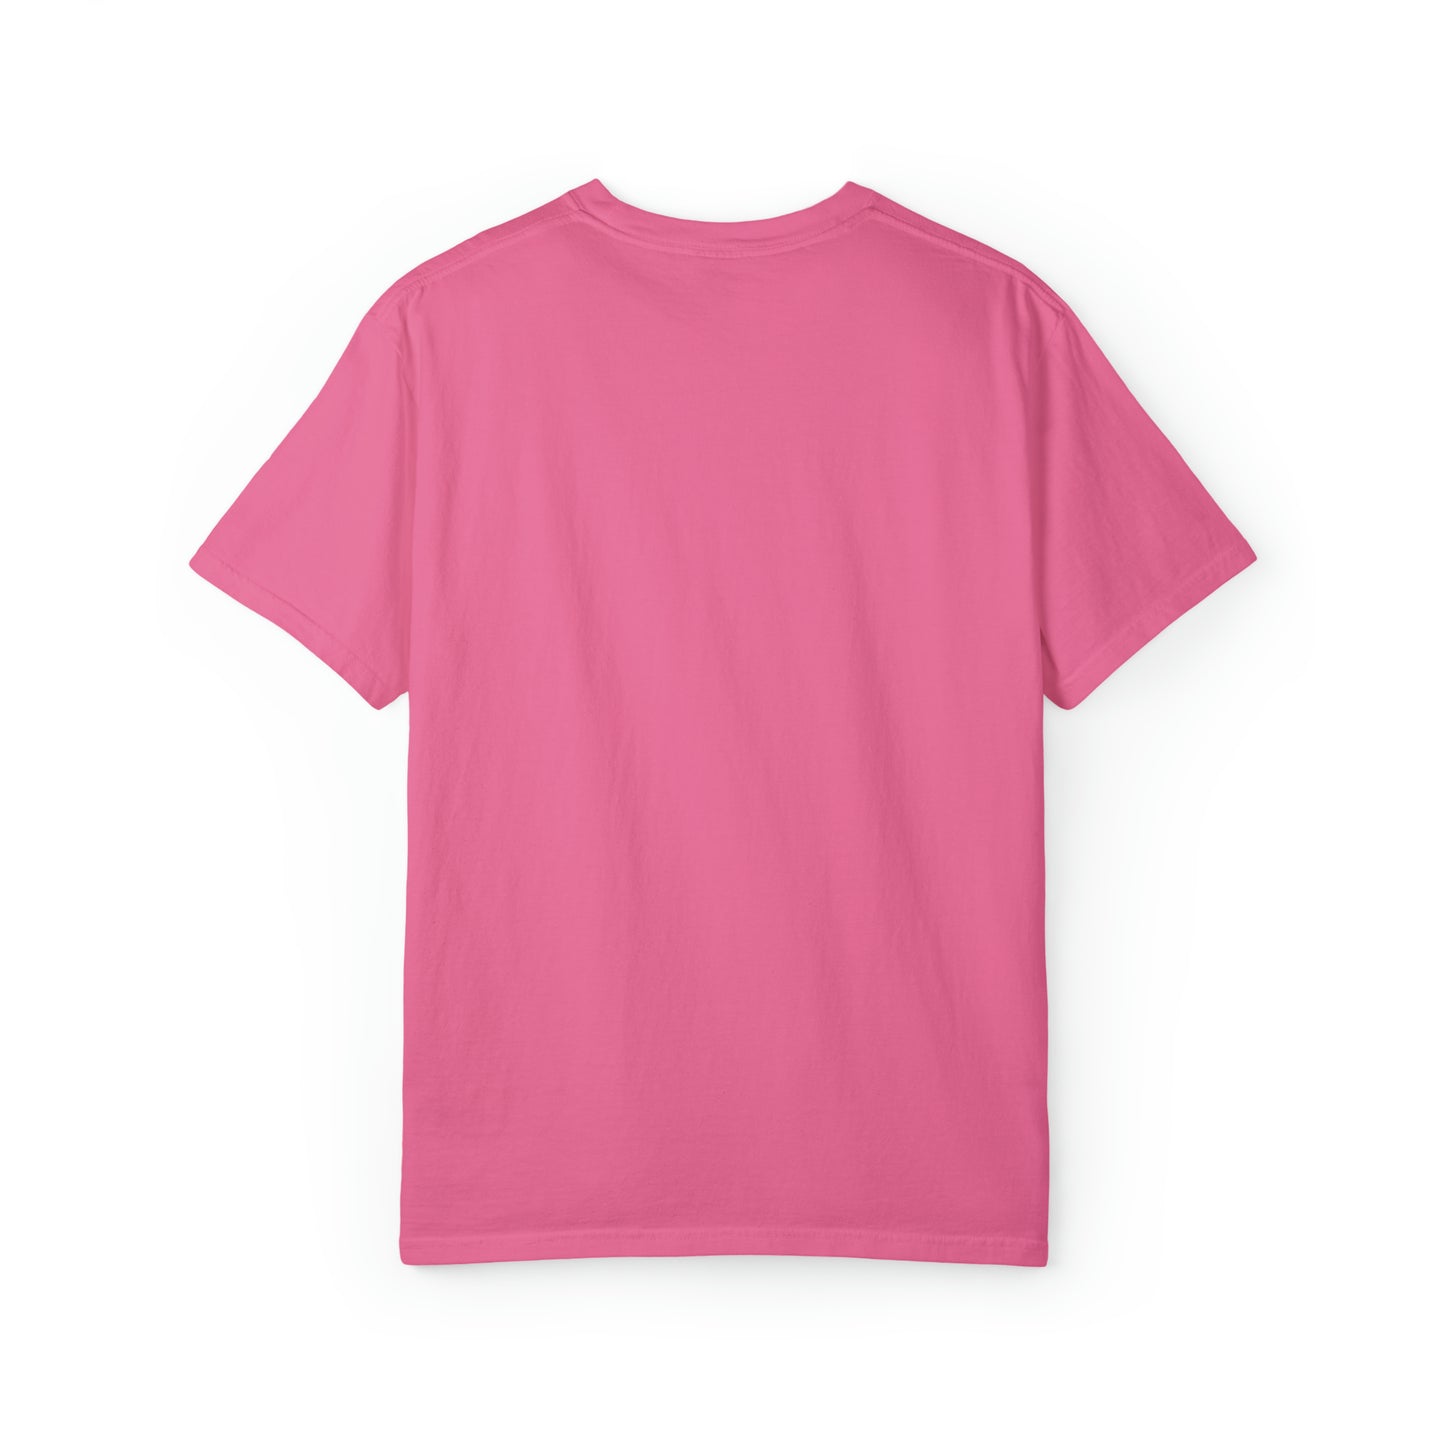 Copy of Copy of Unisex Garment-Dyed T-shirt